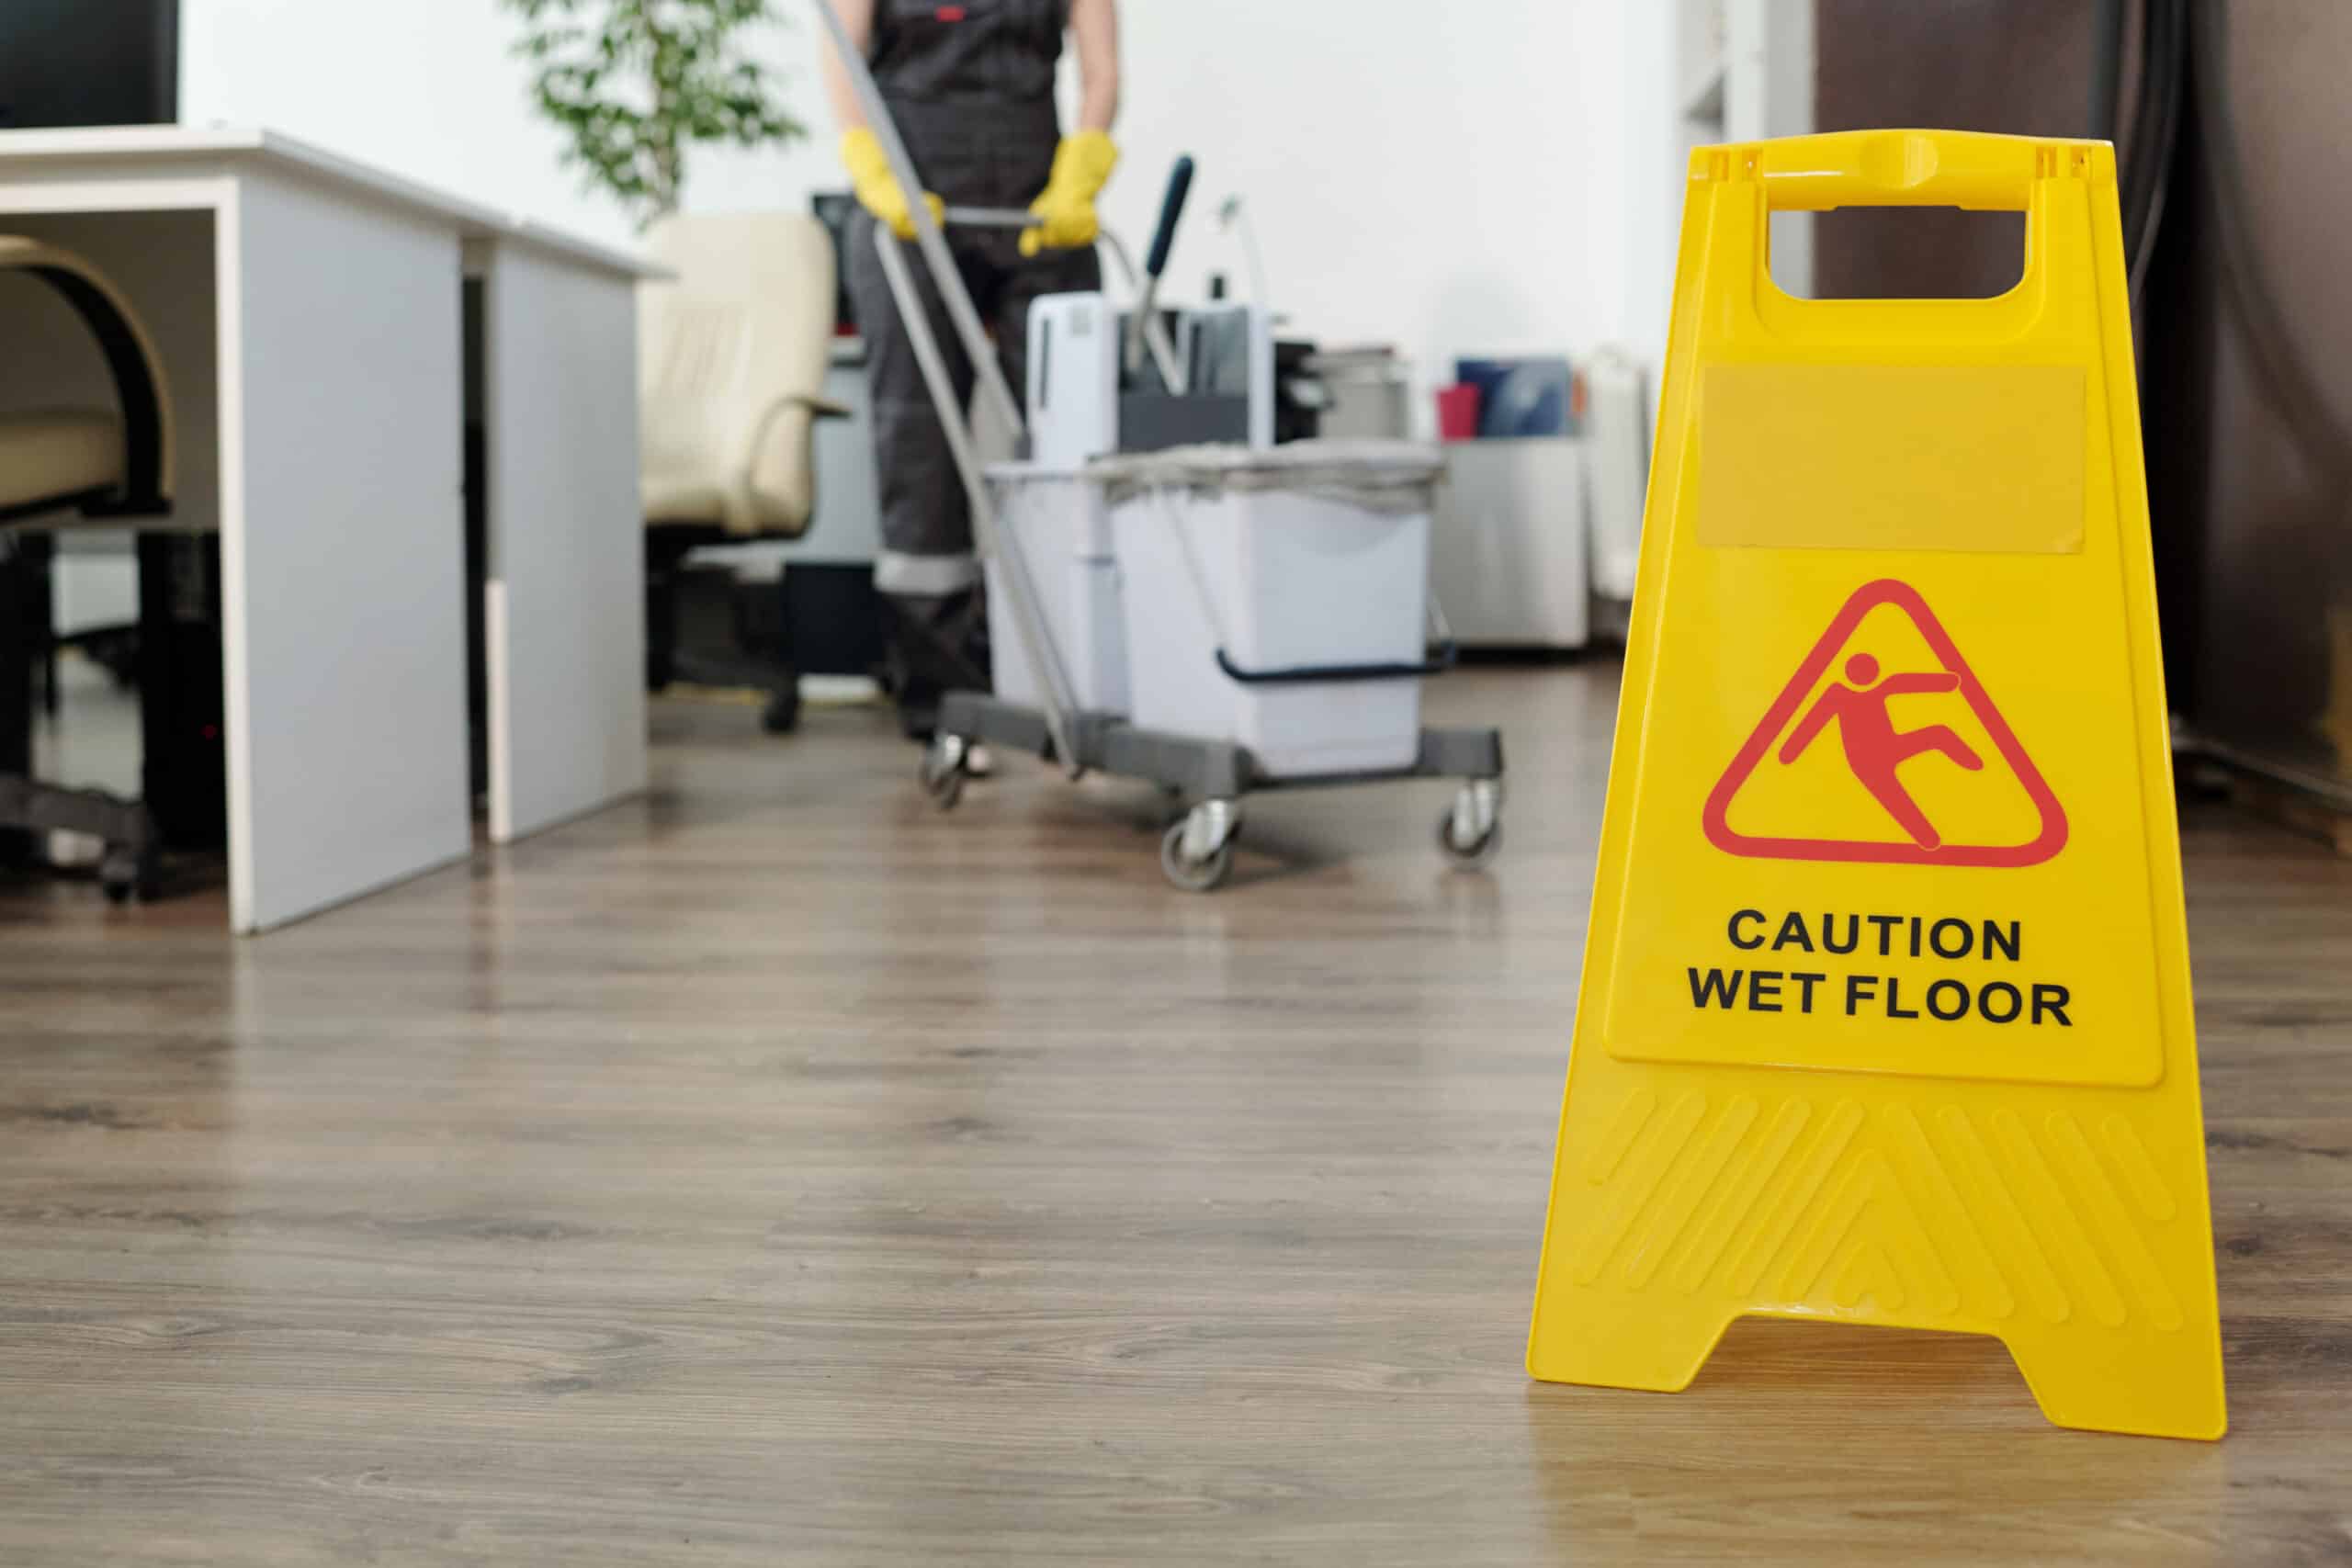 Strategies for Sustainable Cleaning in Offices